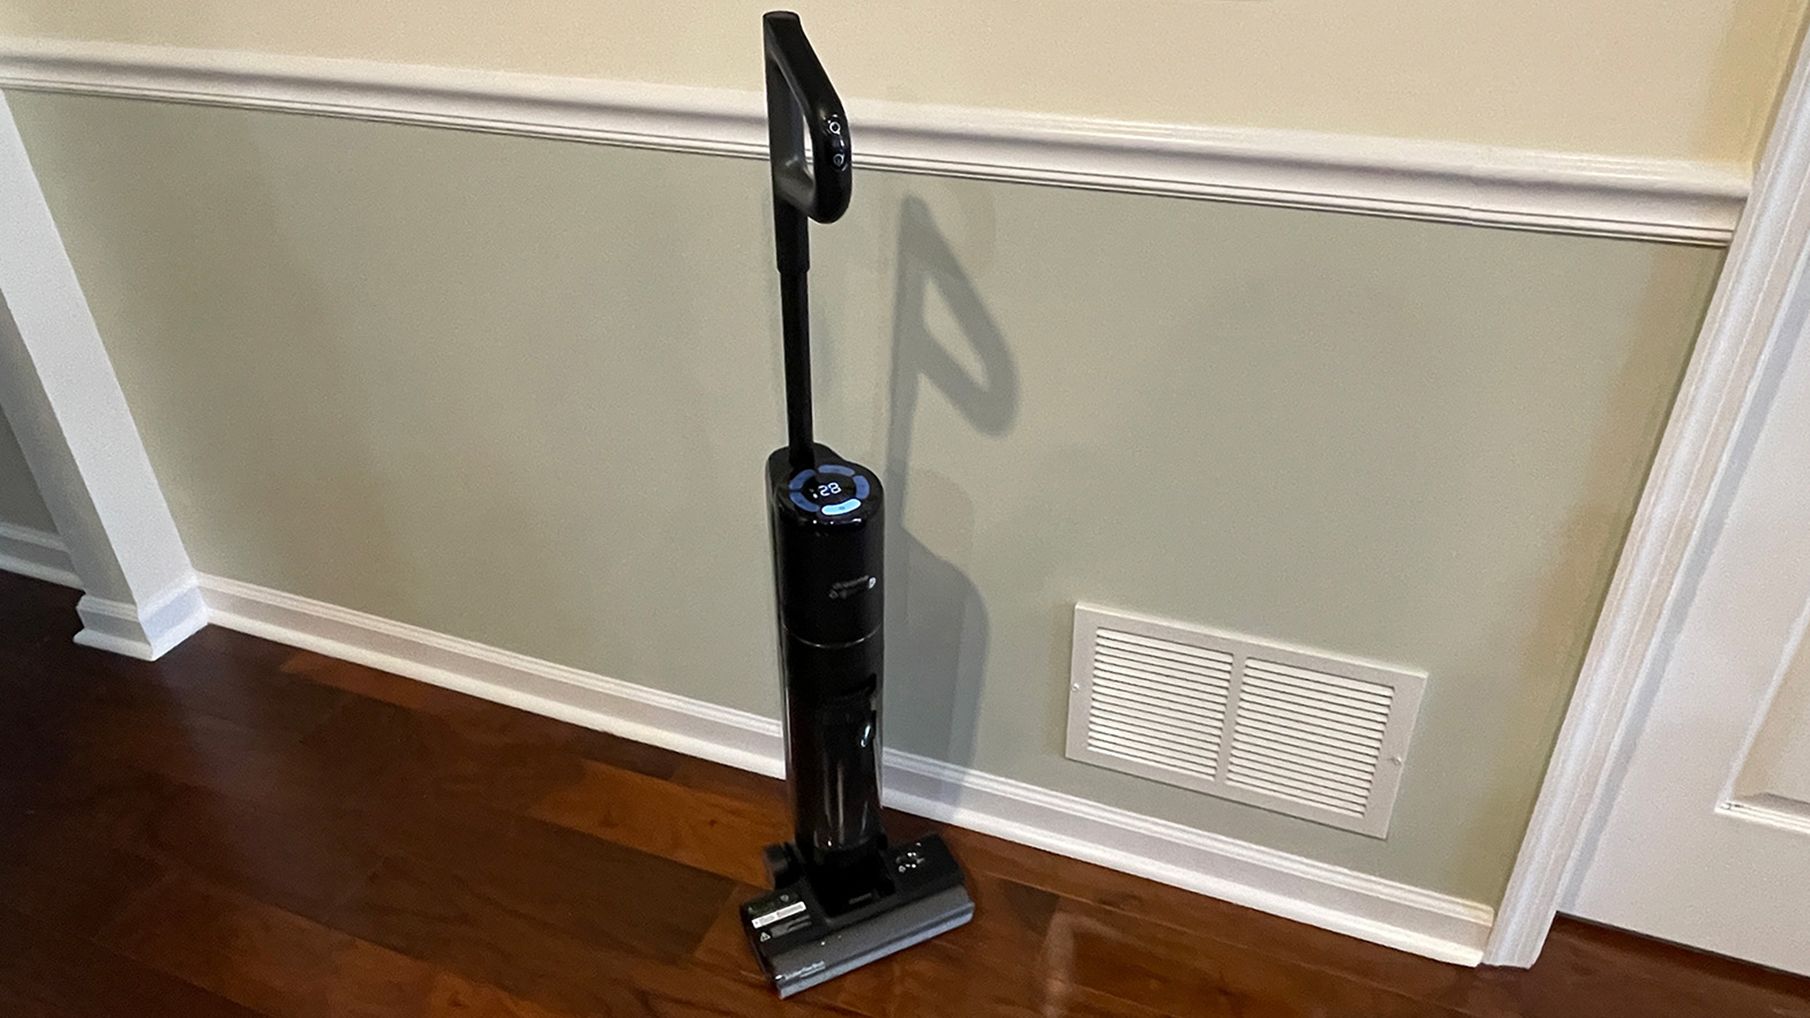 Dreame H12 Pro Wireless Wet/Dry Vacuum Latest Review #vacuumcleaner 